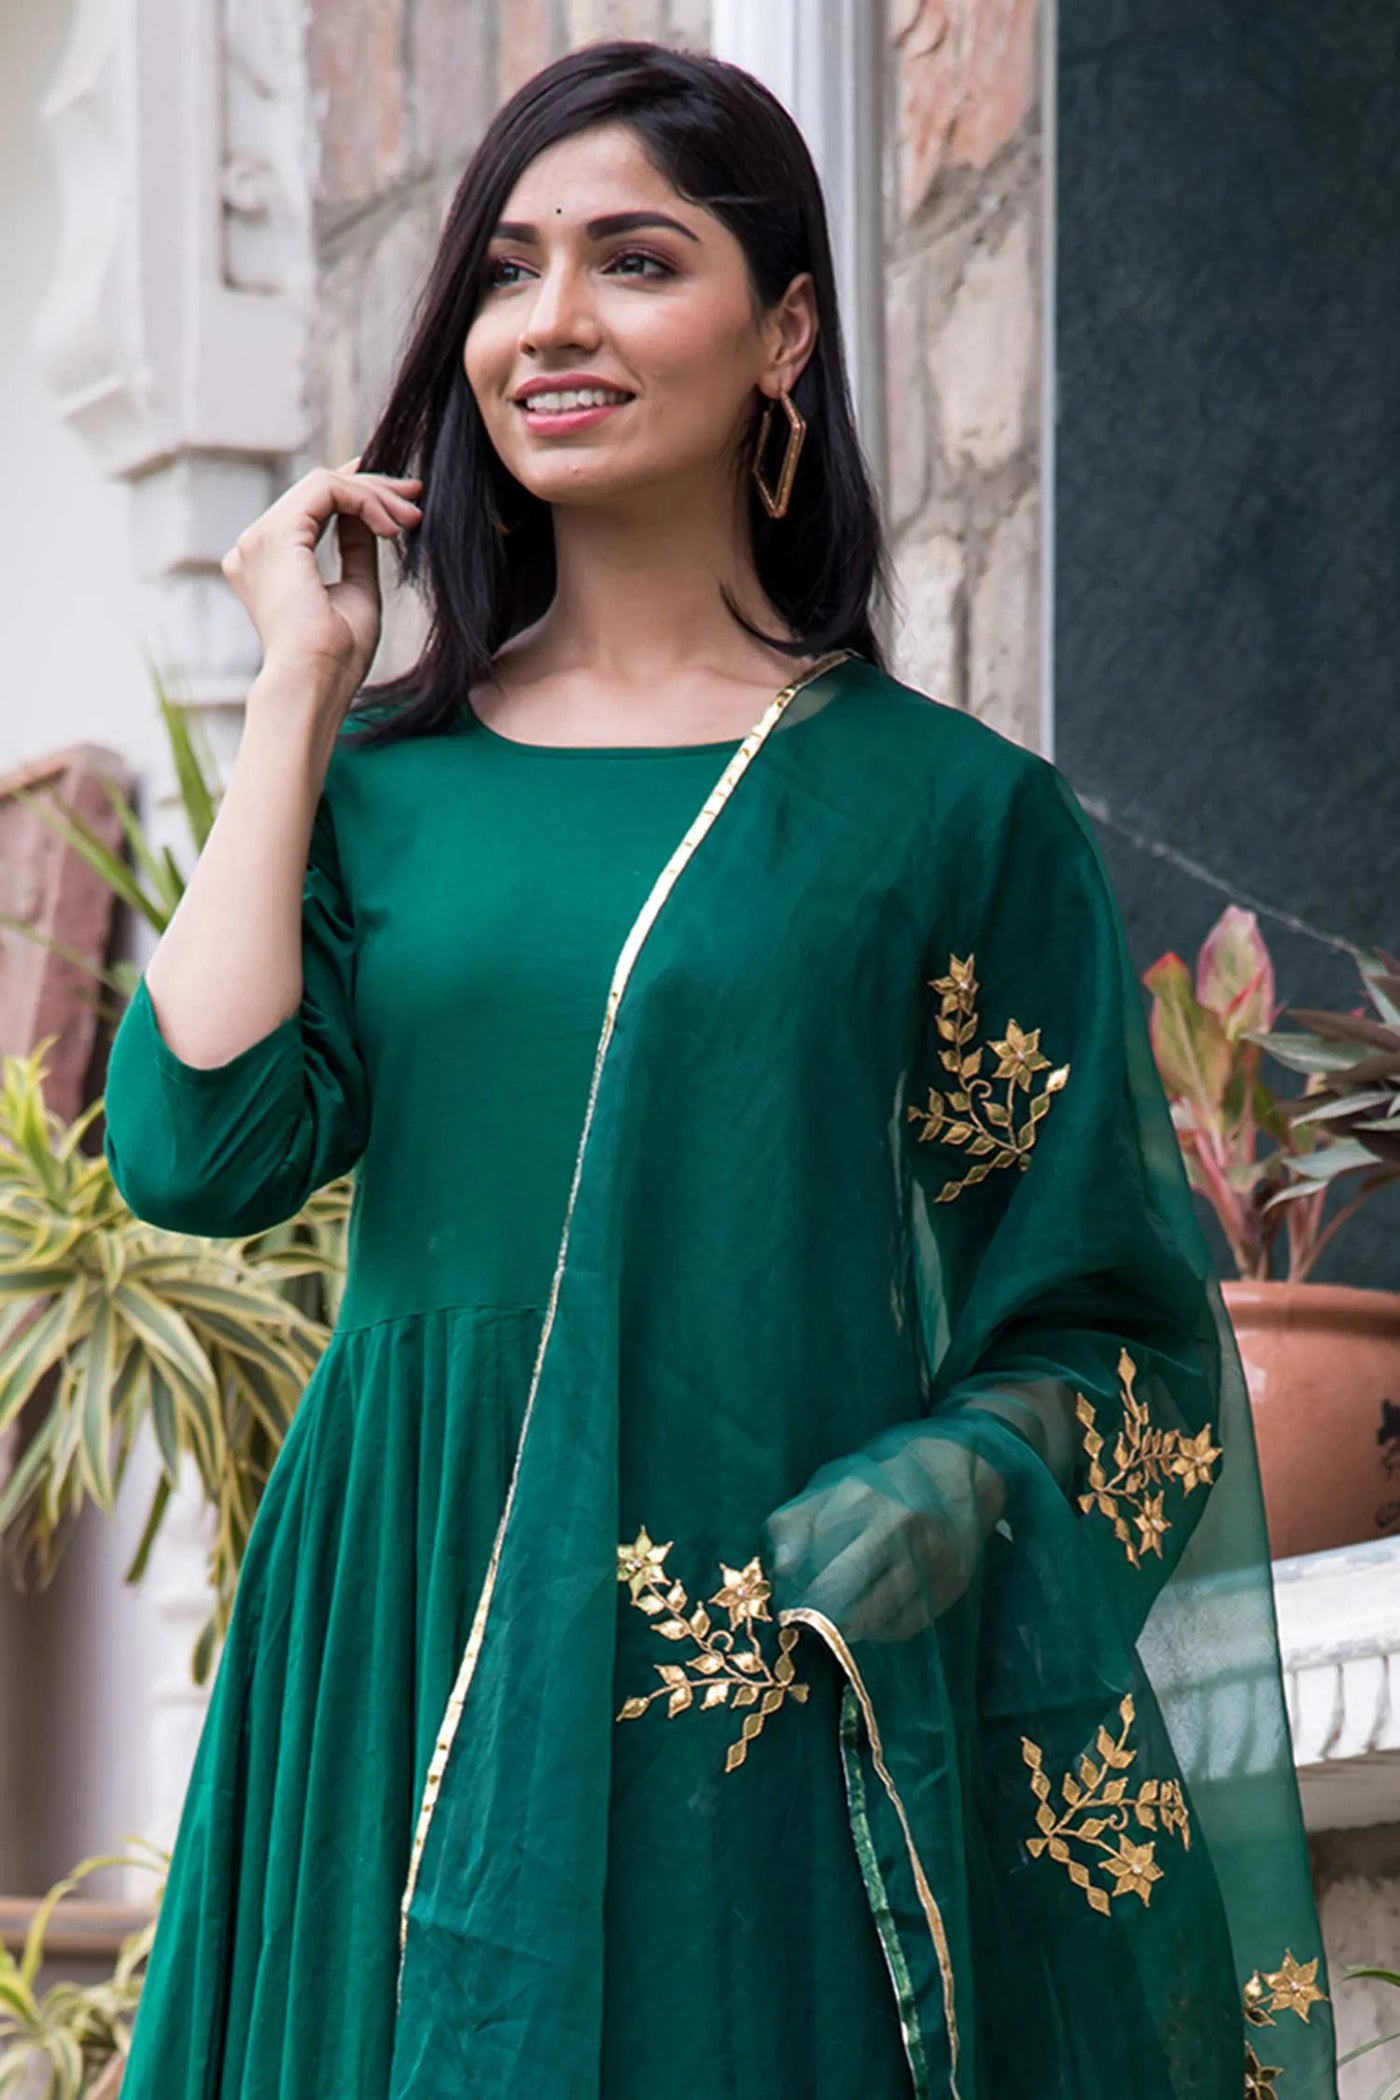 Green Cotton Mul Anarkali Set - Indian Clothing in Denver, CO, Aurora, CO, Boulder, CO, Fort Collins, CO, Colorado Springs, CO, Parker, CO, Highlands Ranch, CO, Cherry Creek, CO, Centennial, CO, and Longmont, CO. Nationwide shipping USA - India Fashion X